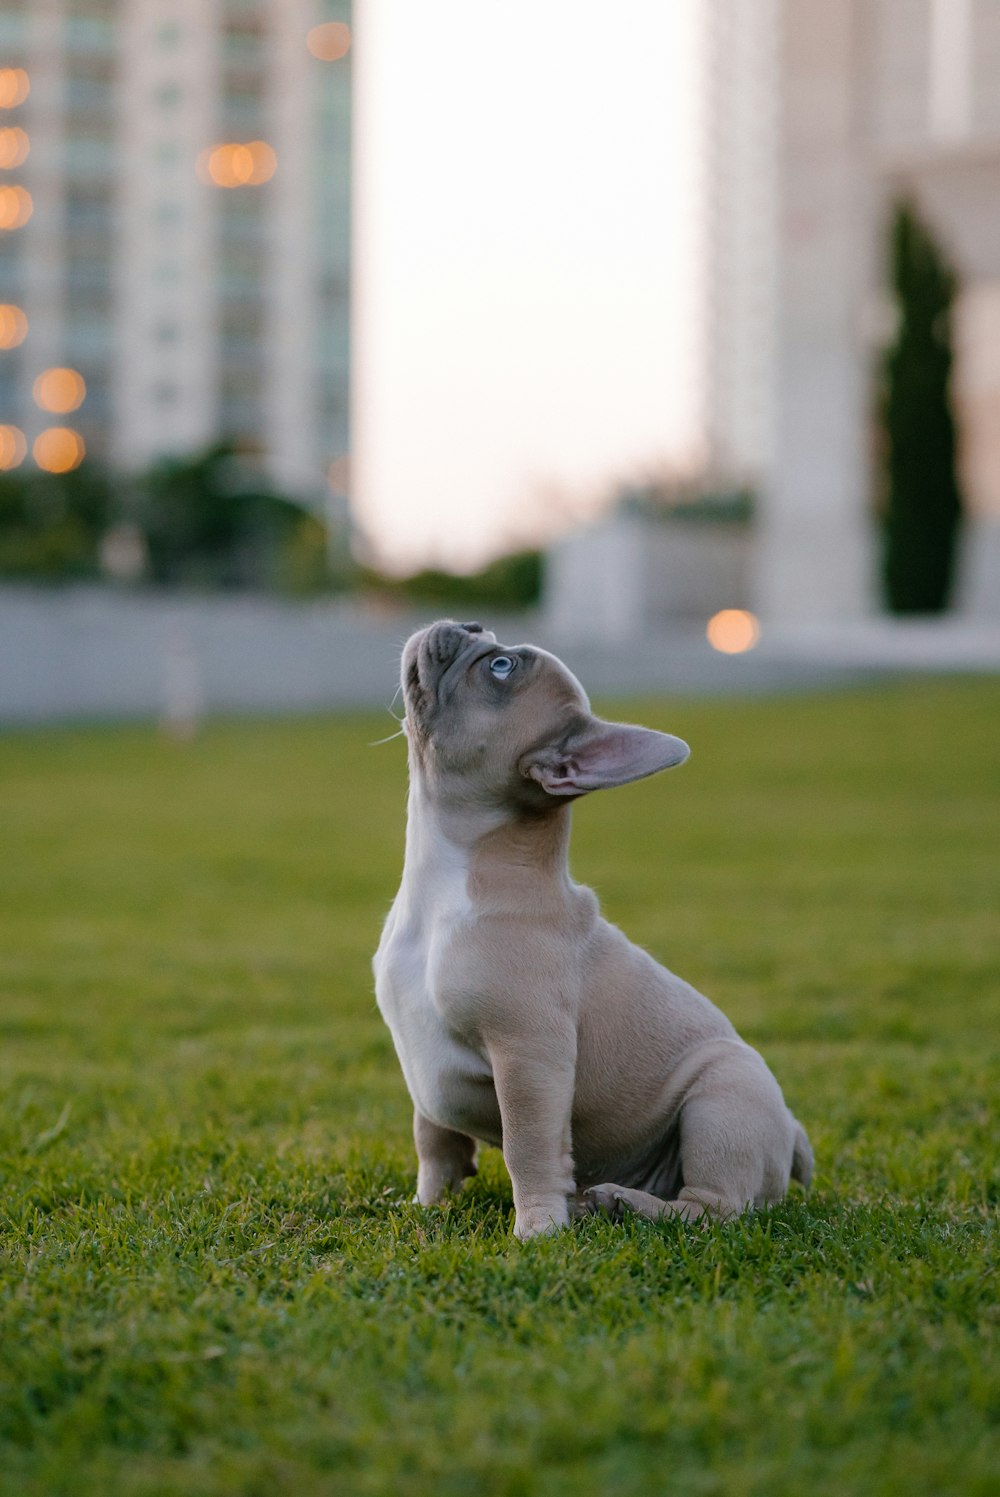 white and gray short coated puppy running on green grass field during daytime